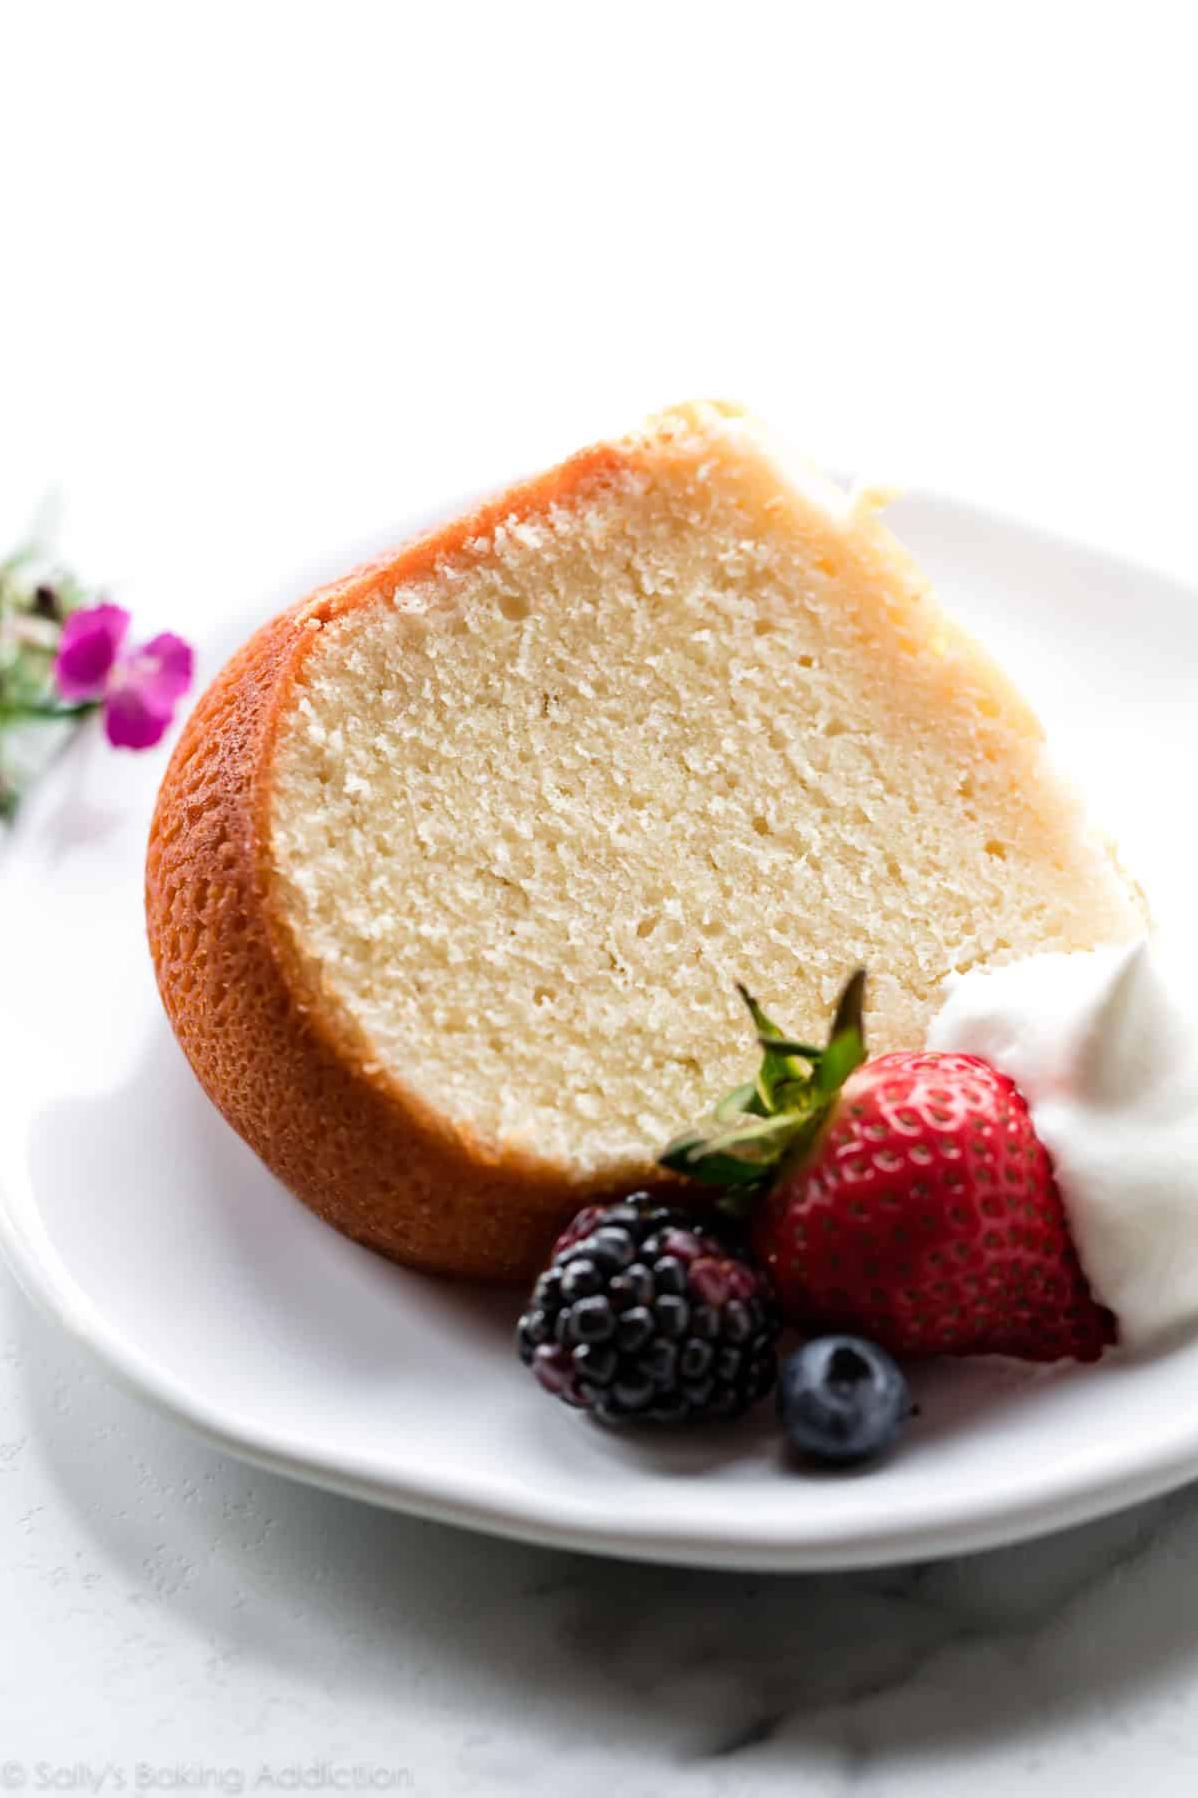  One bite and you'll be hooked on this classic cake recipe.